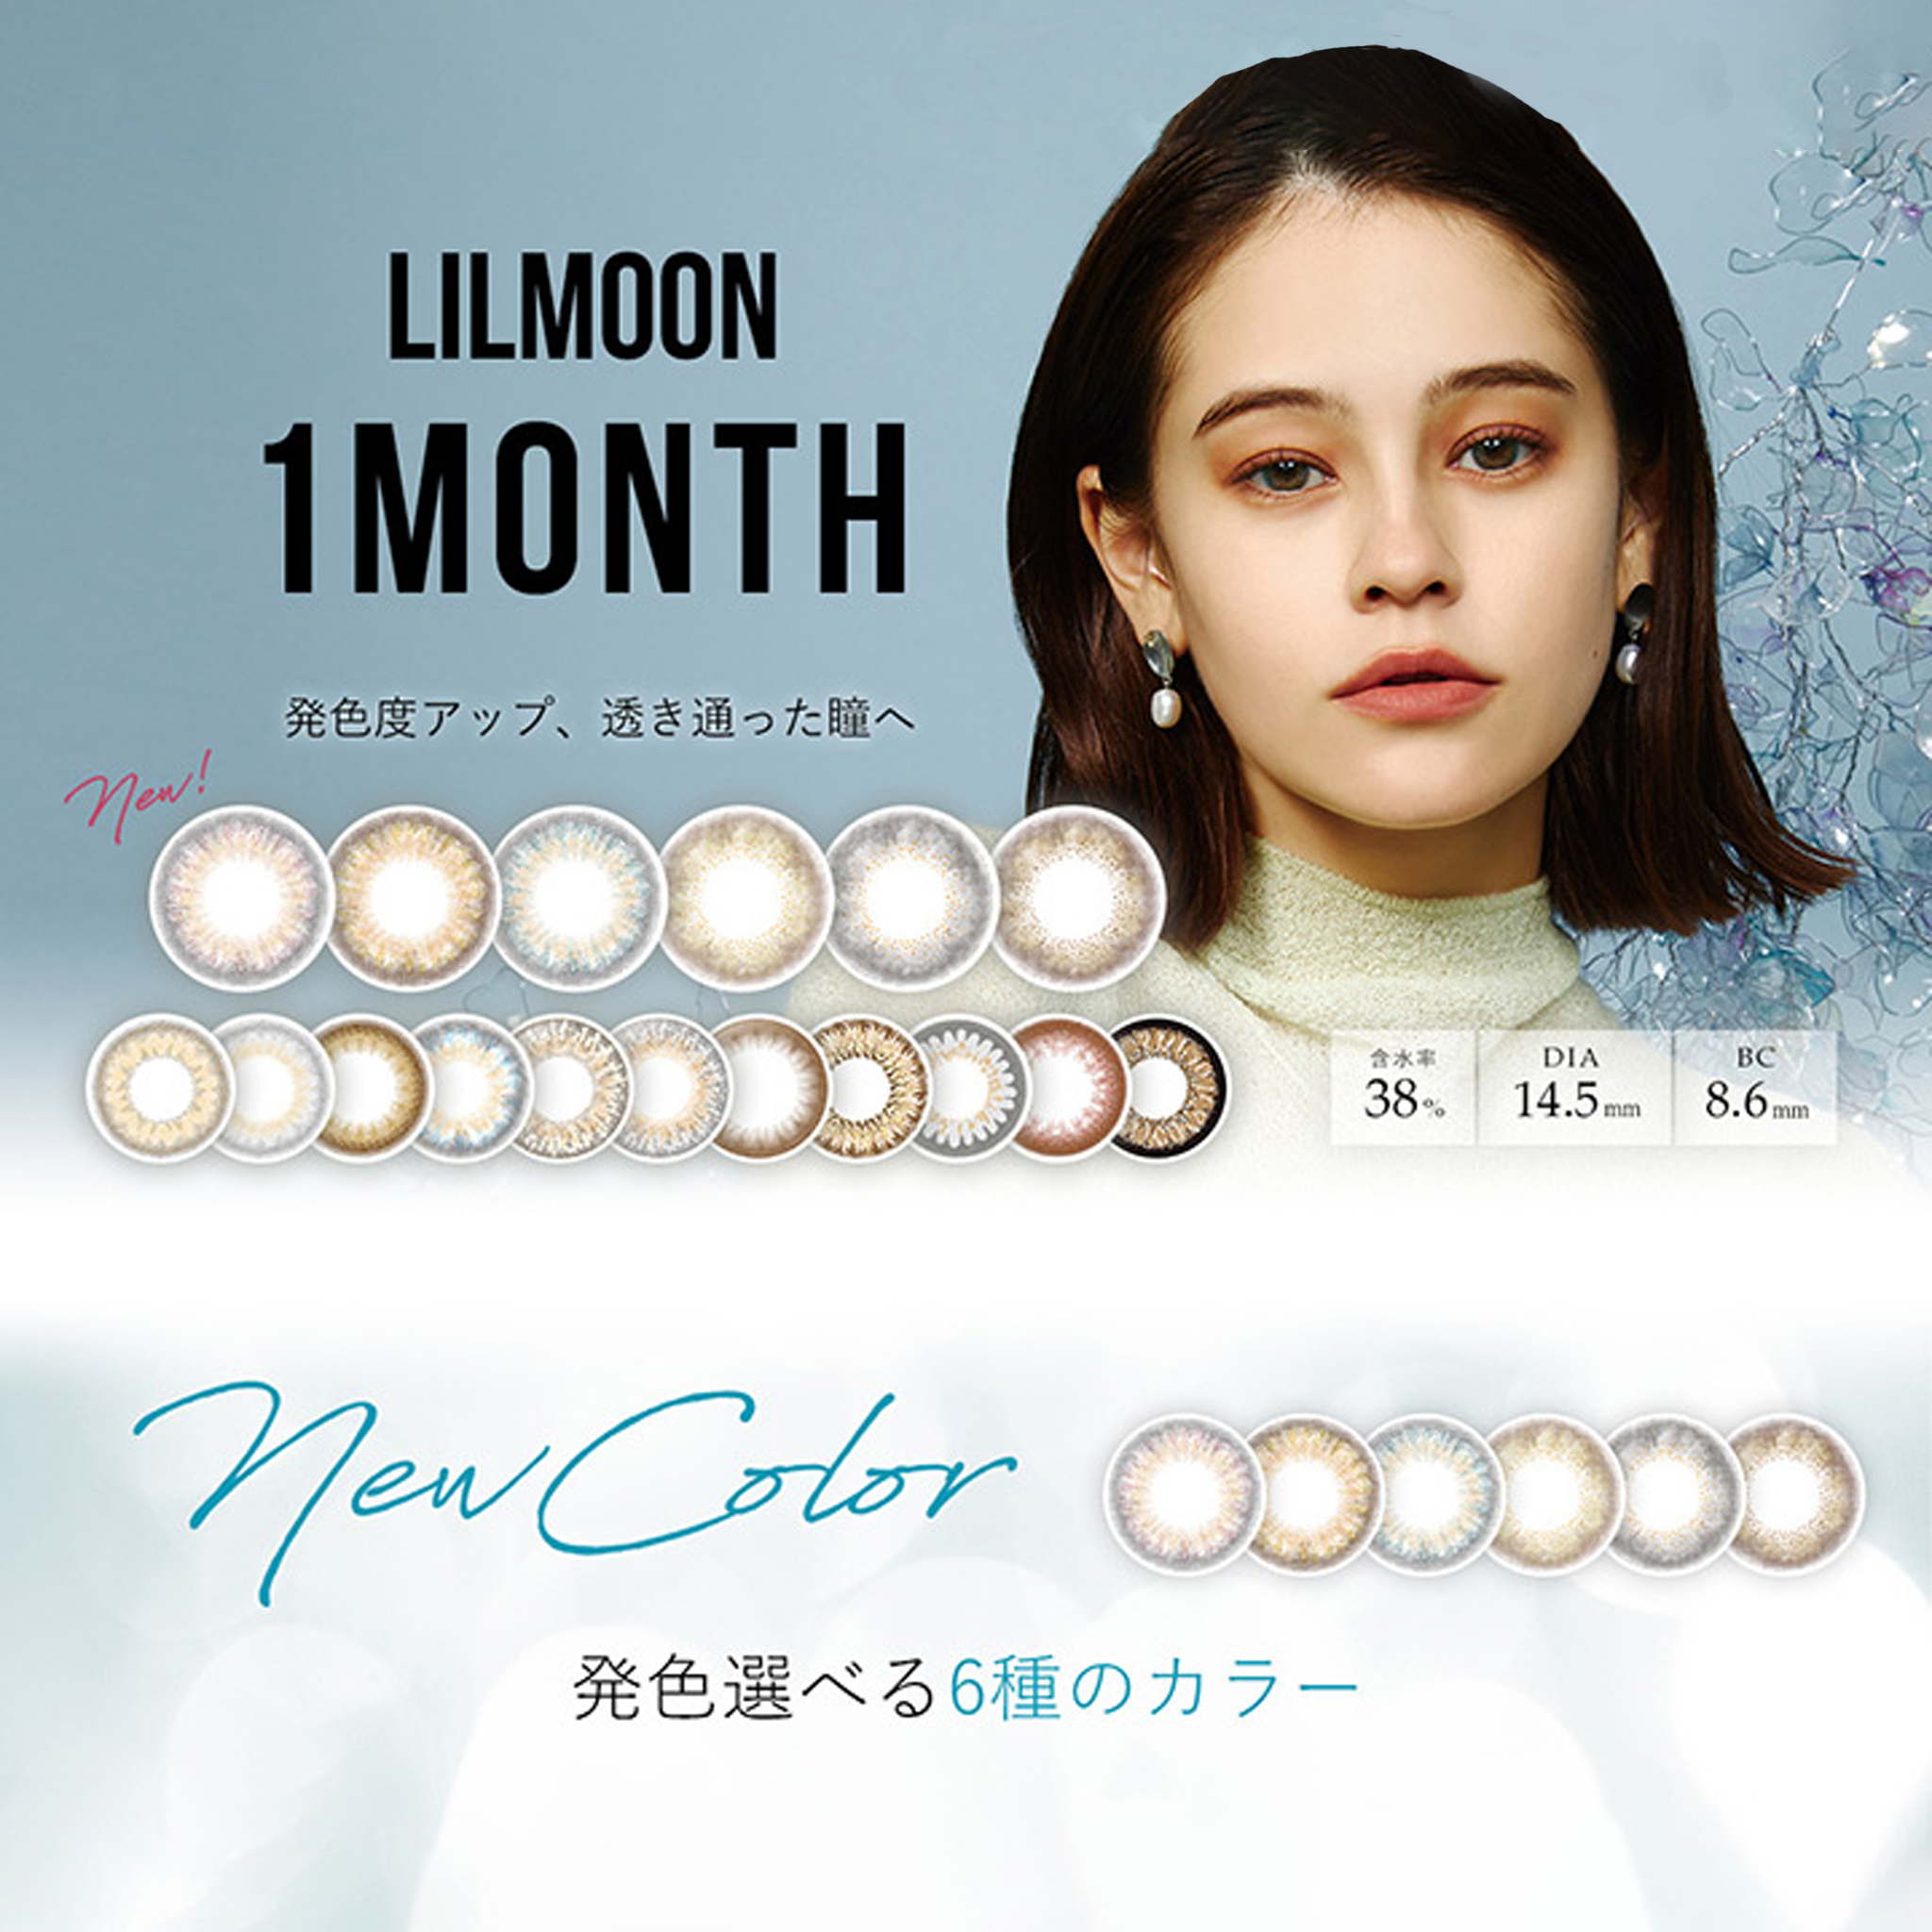 LIL MOON Monthy Contact Lenses ±0.00 2lenses